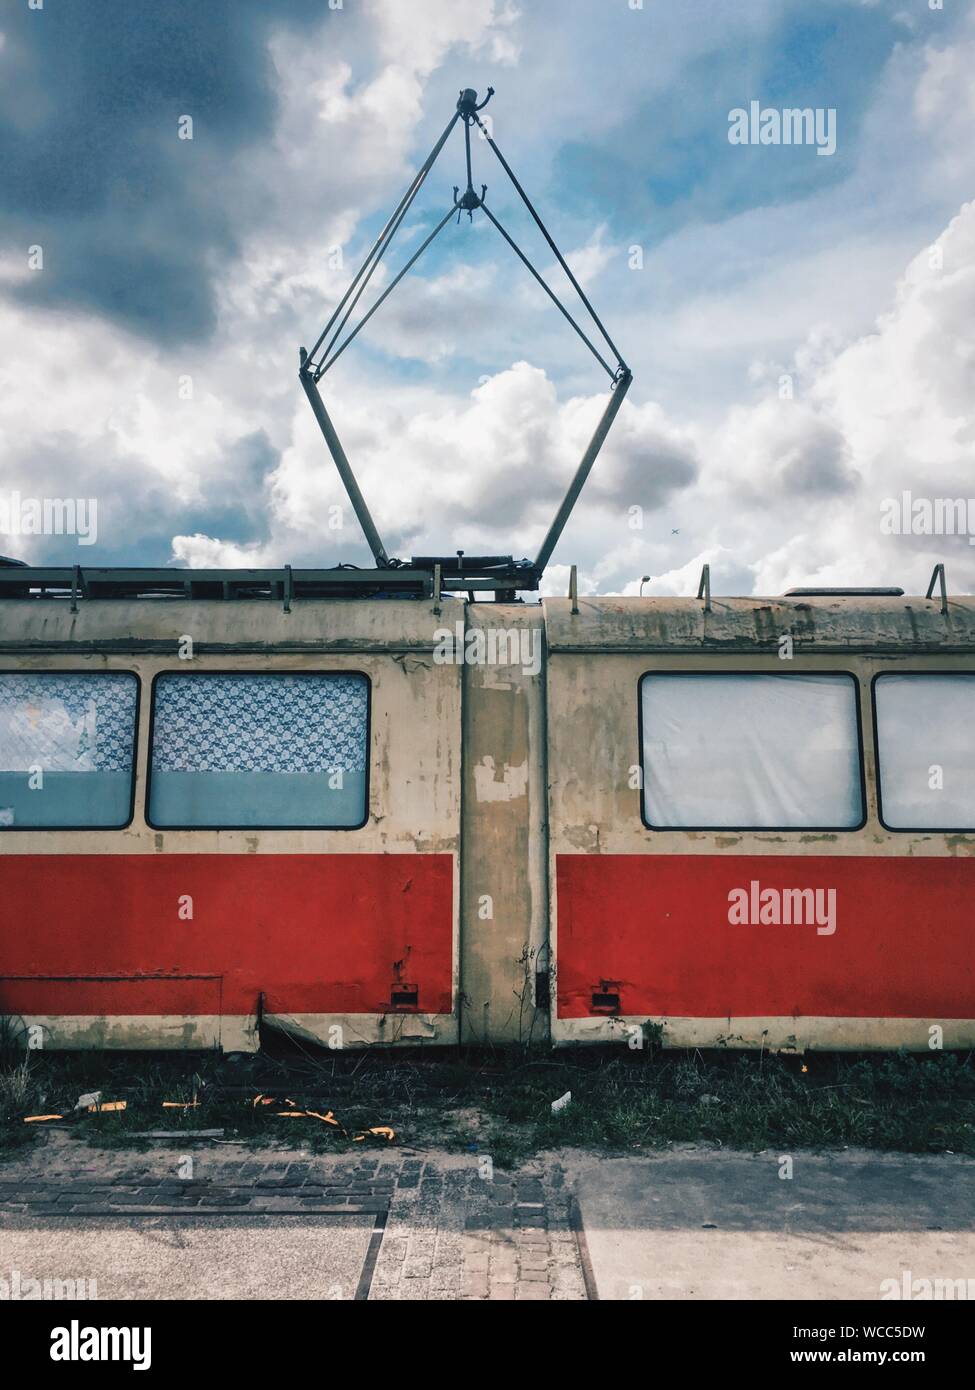 Abandoned Tram Against Cloudy Sky Stock Photo